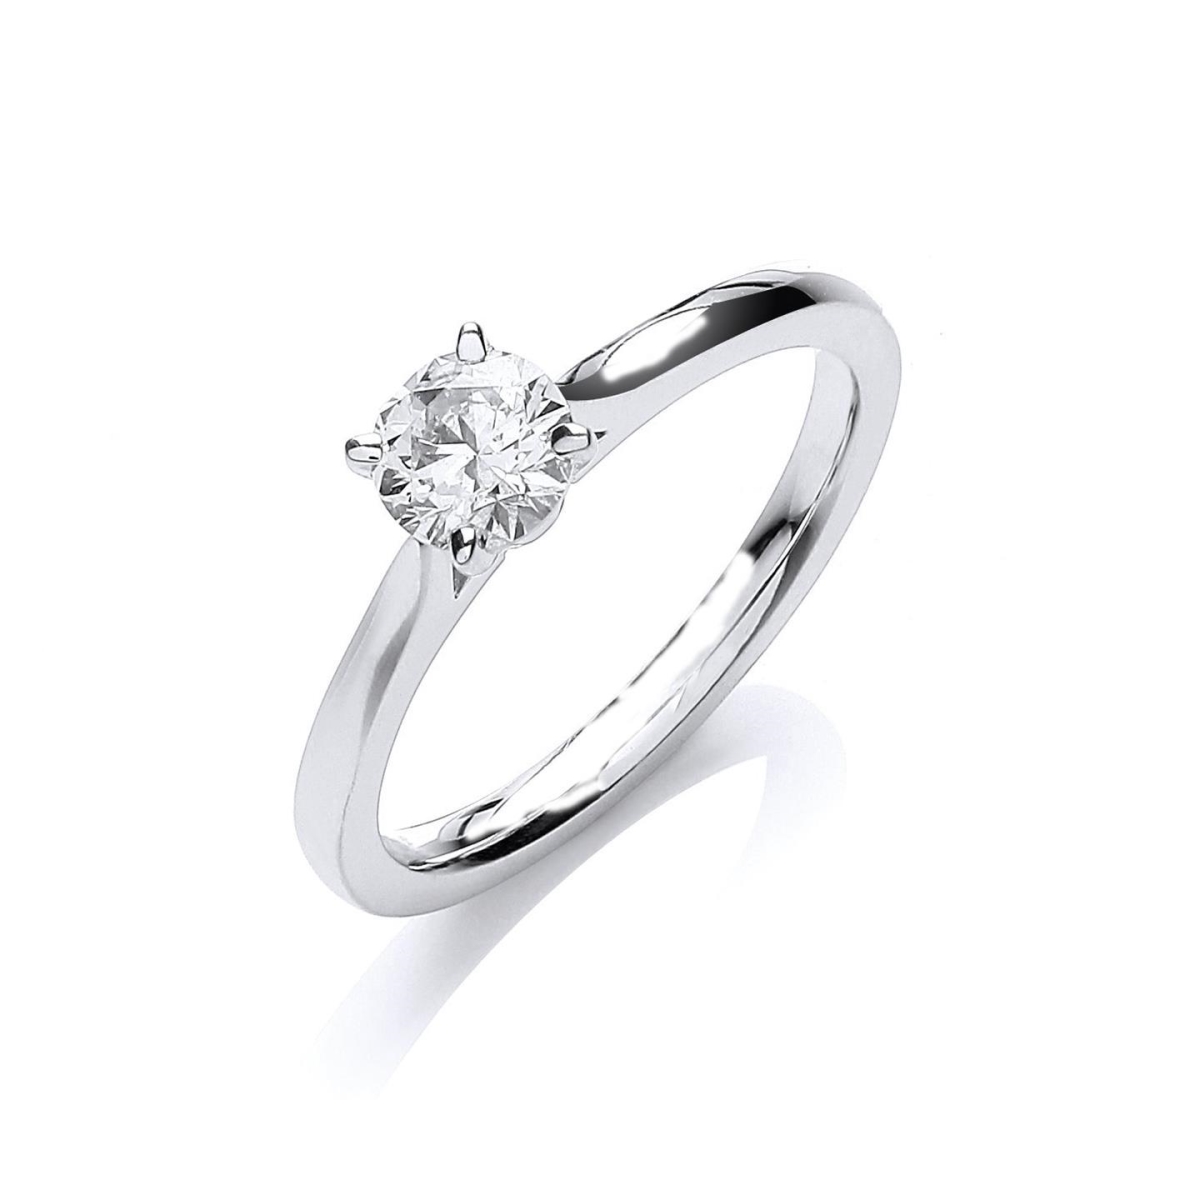 Picture of Harry Chad Enterprises 40022 Sparkling 1.50 CT Round Diamond Engagement Ring, 14K White Gold - Size 6.5